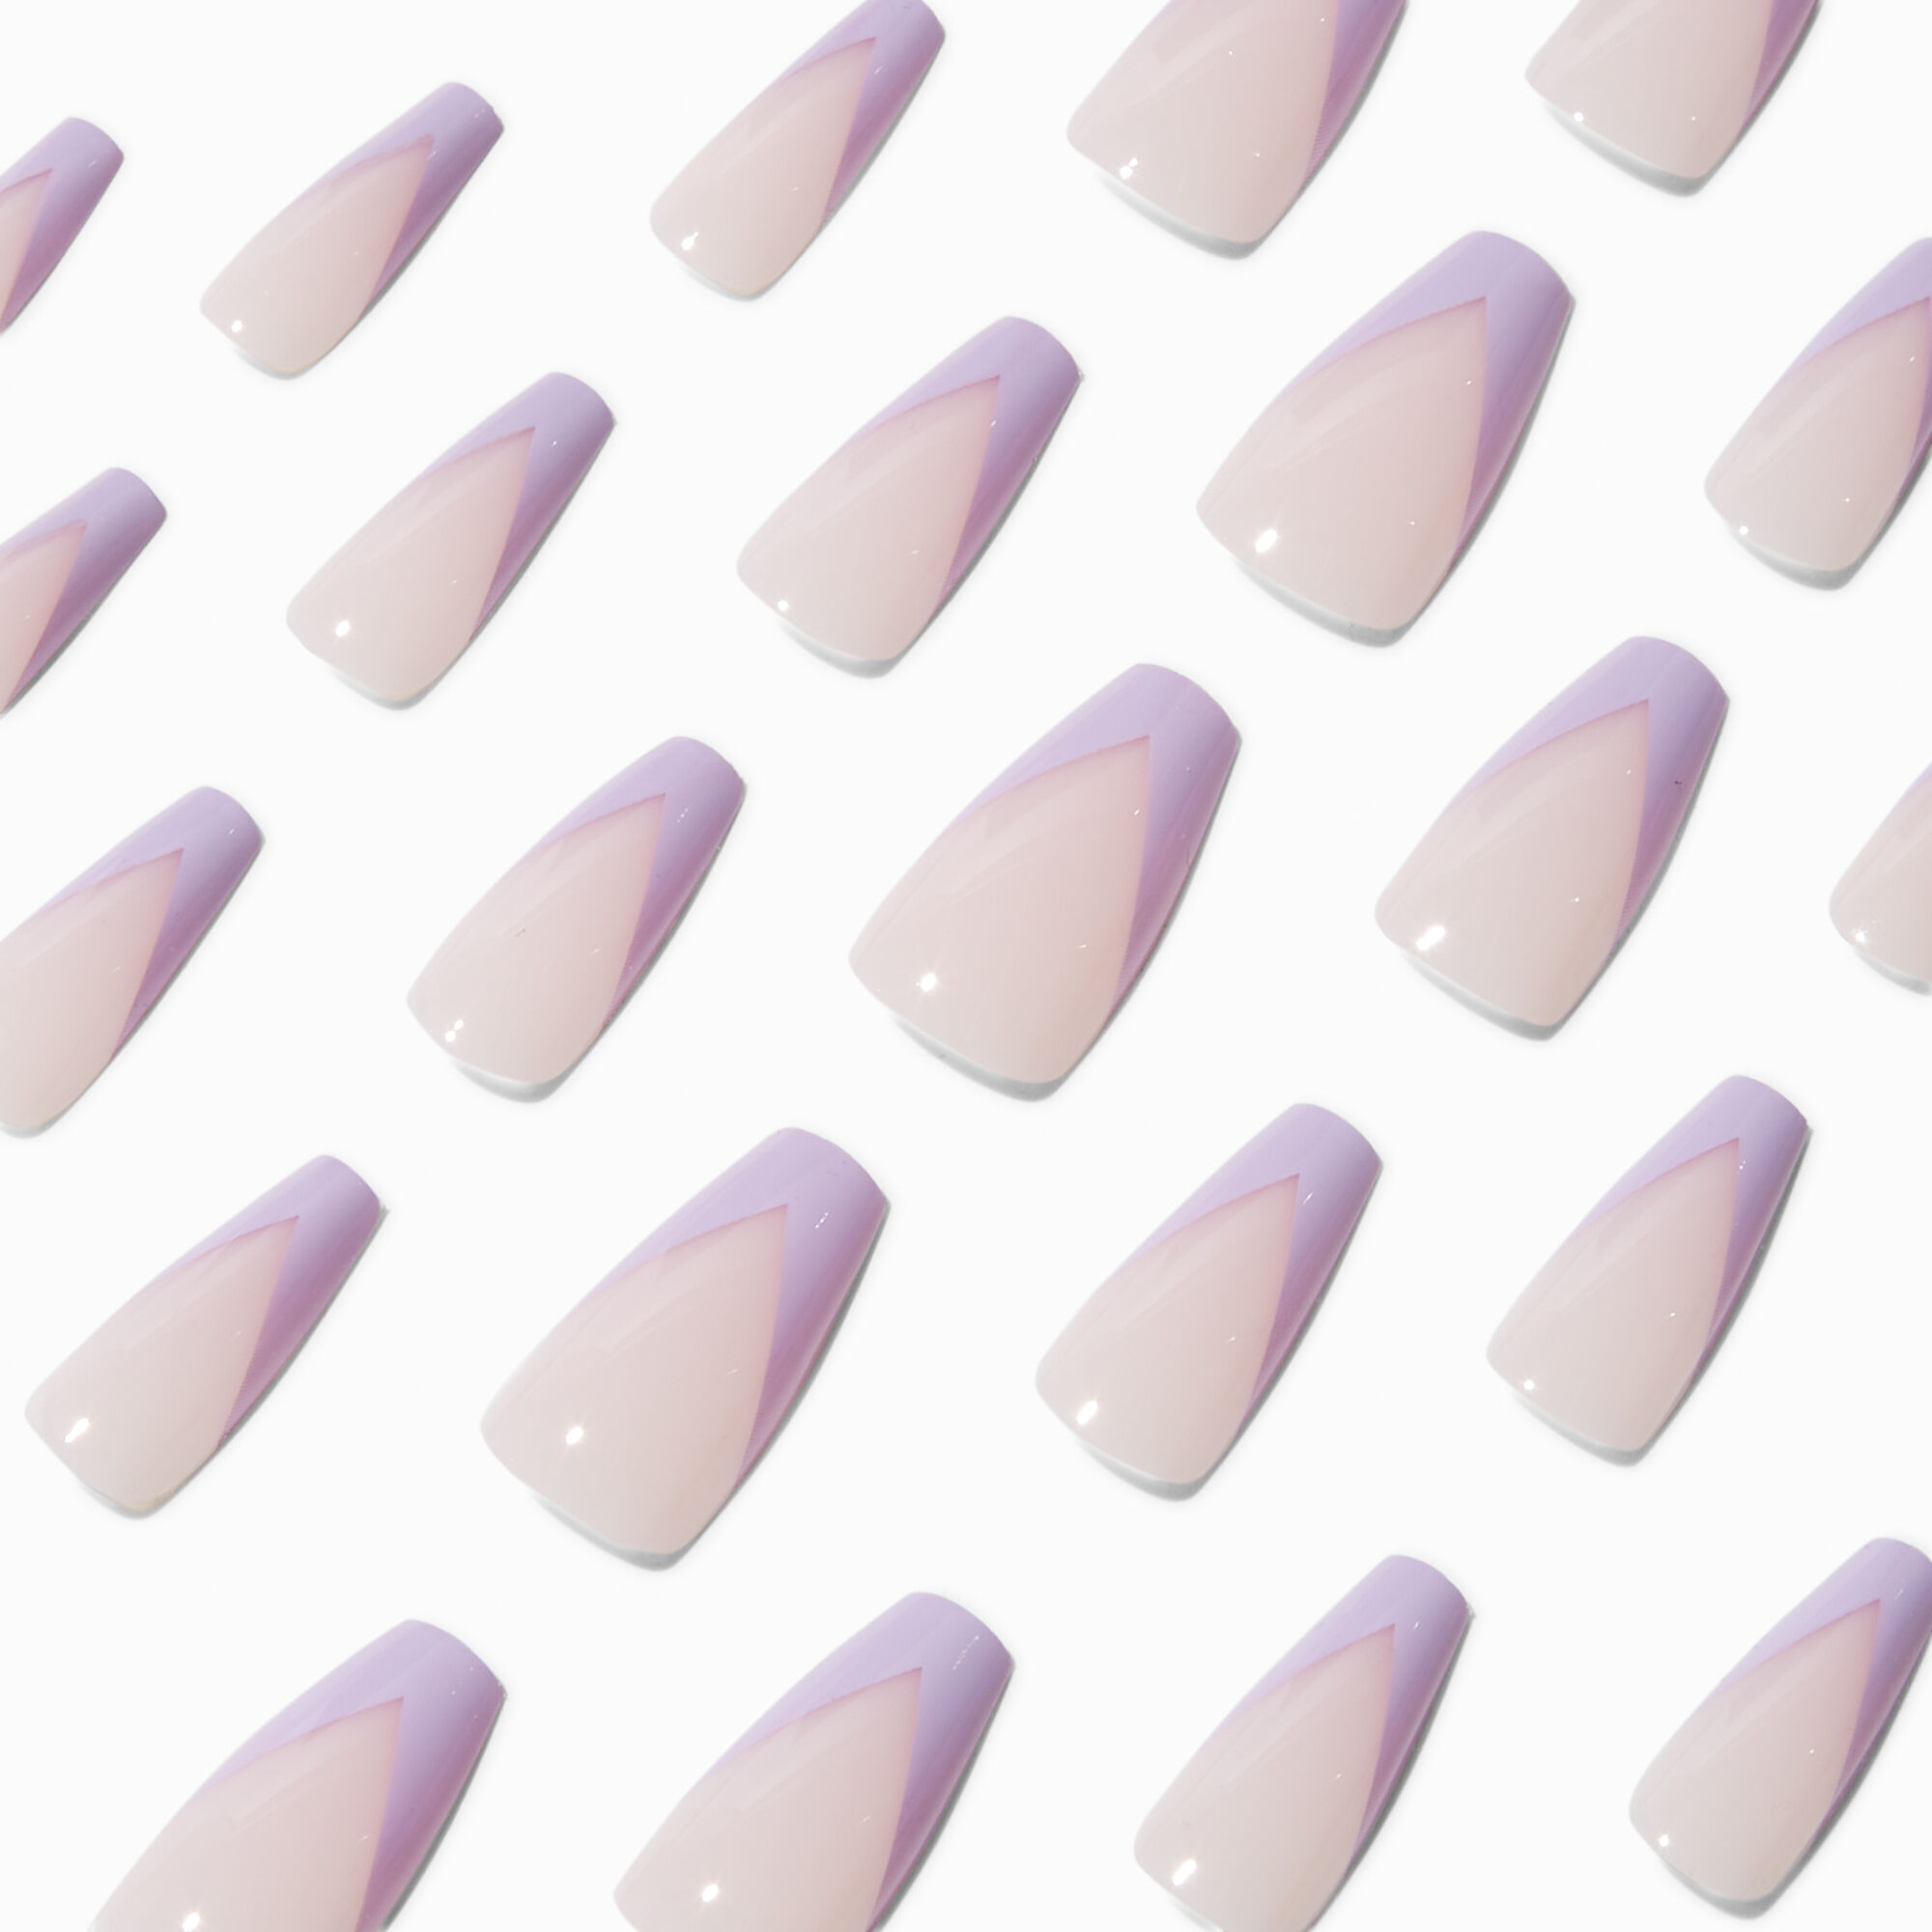 View Claires French Tips Squareletto Vegan Faux Nail Set 24 Pack Lilac information